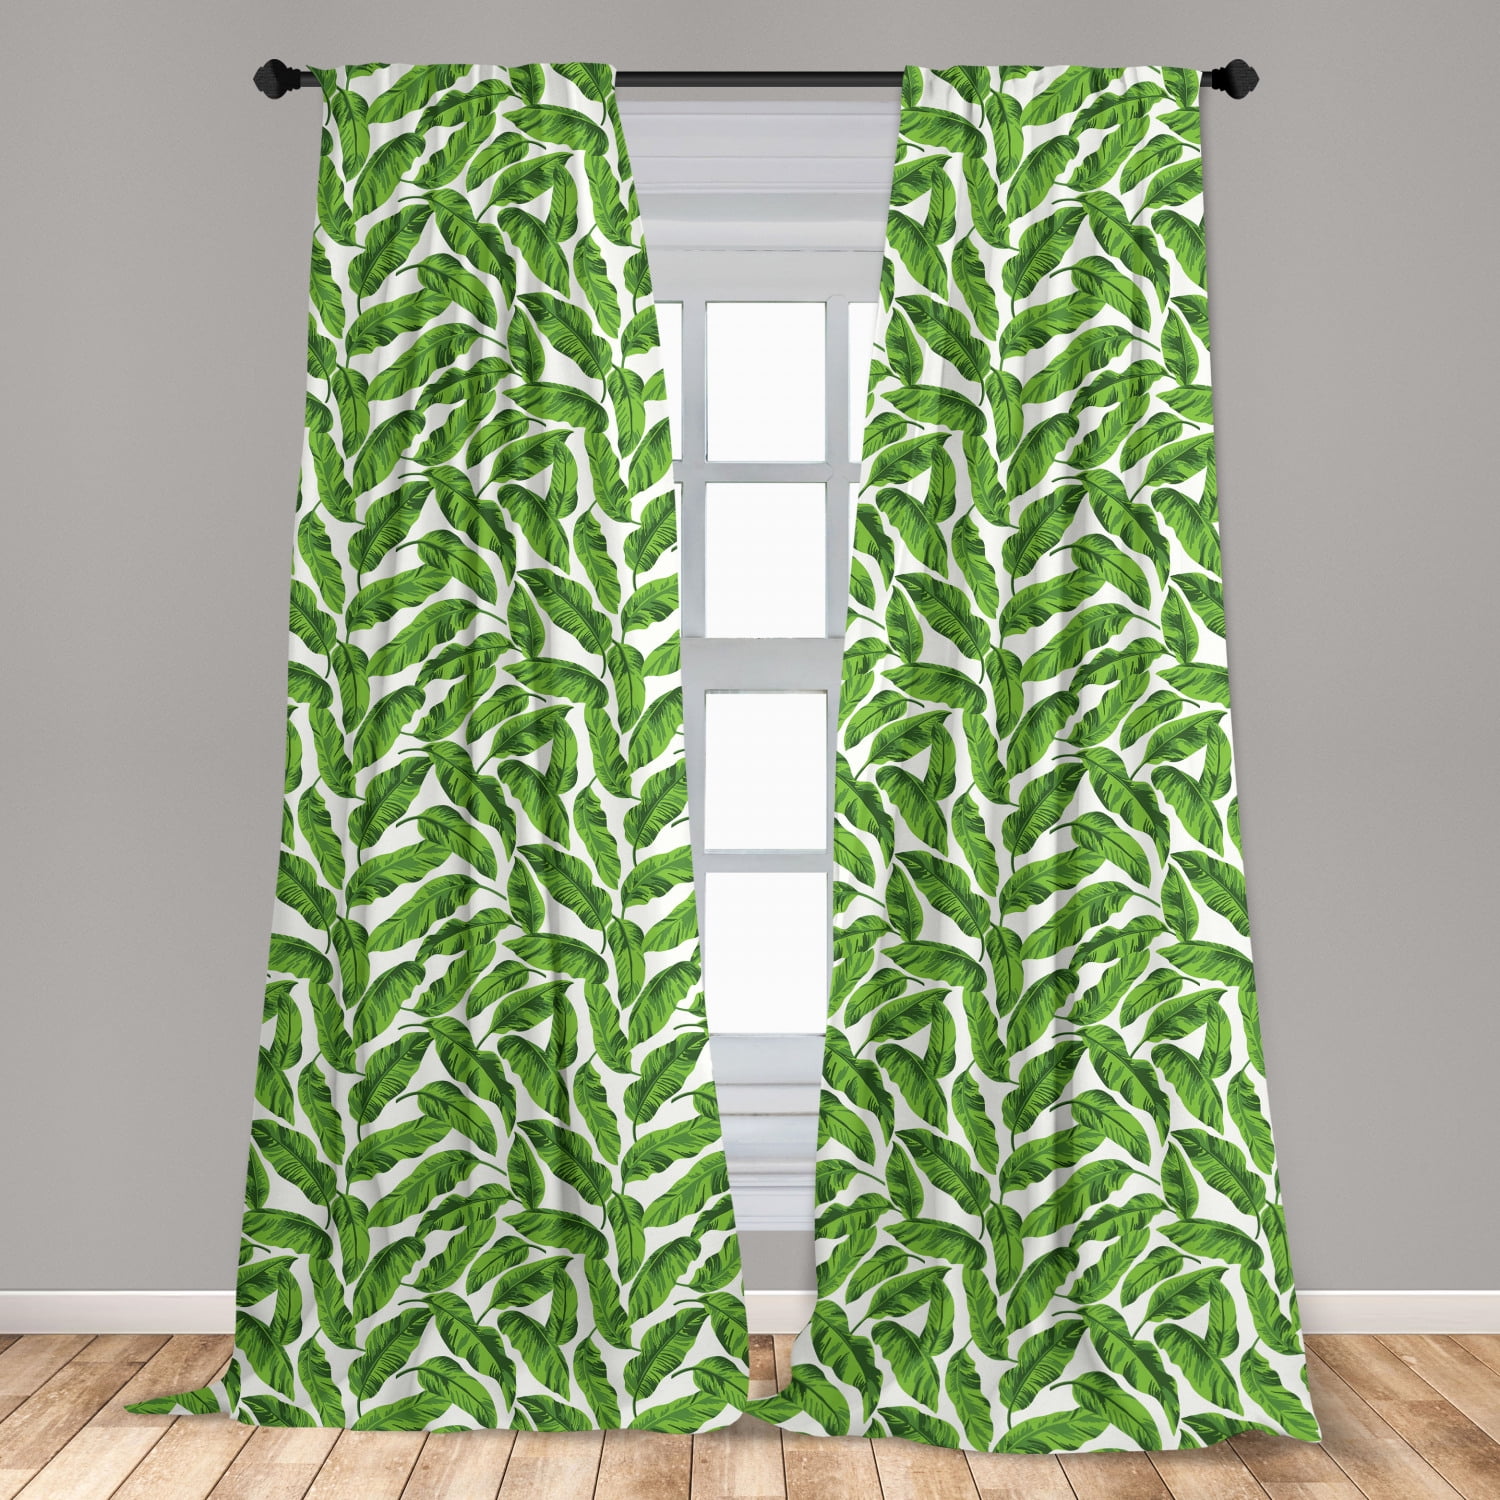 Tropical Banana Leaves Blockout Window Curtain 2 Panels Set Fabric Ready Made 